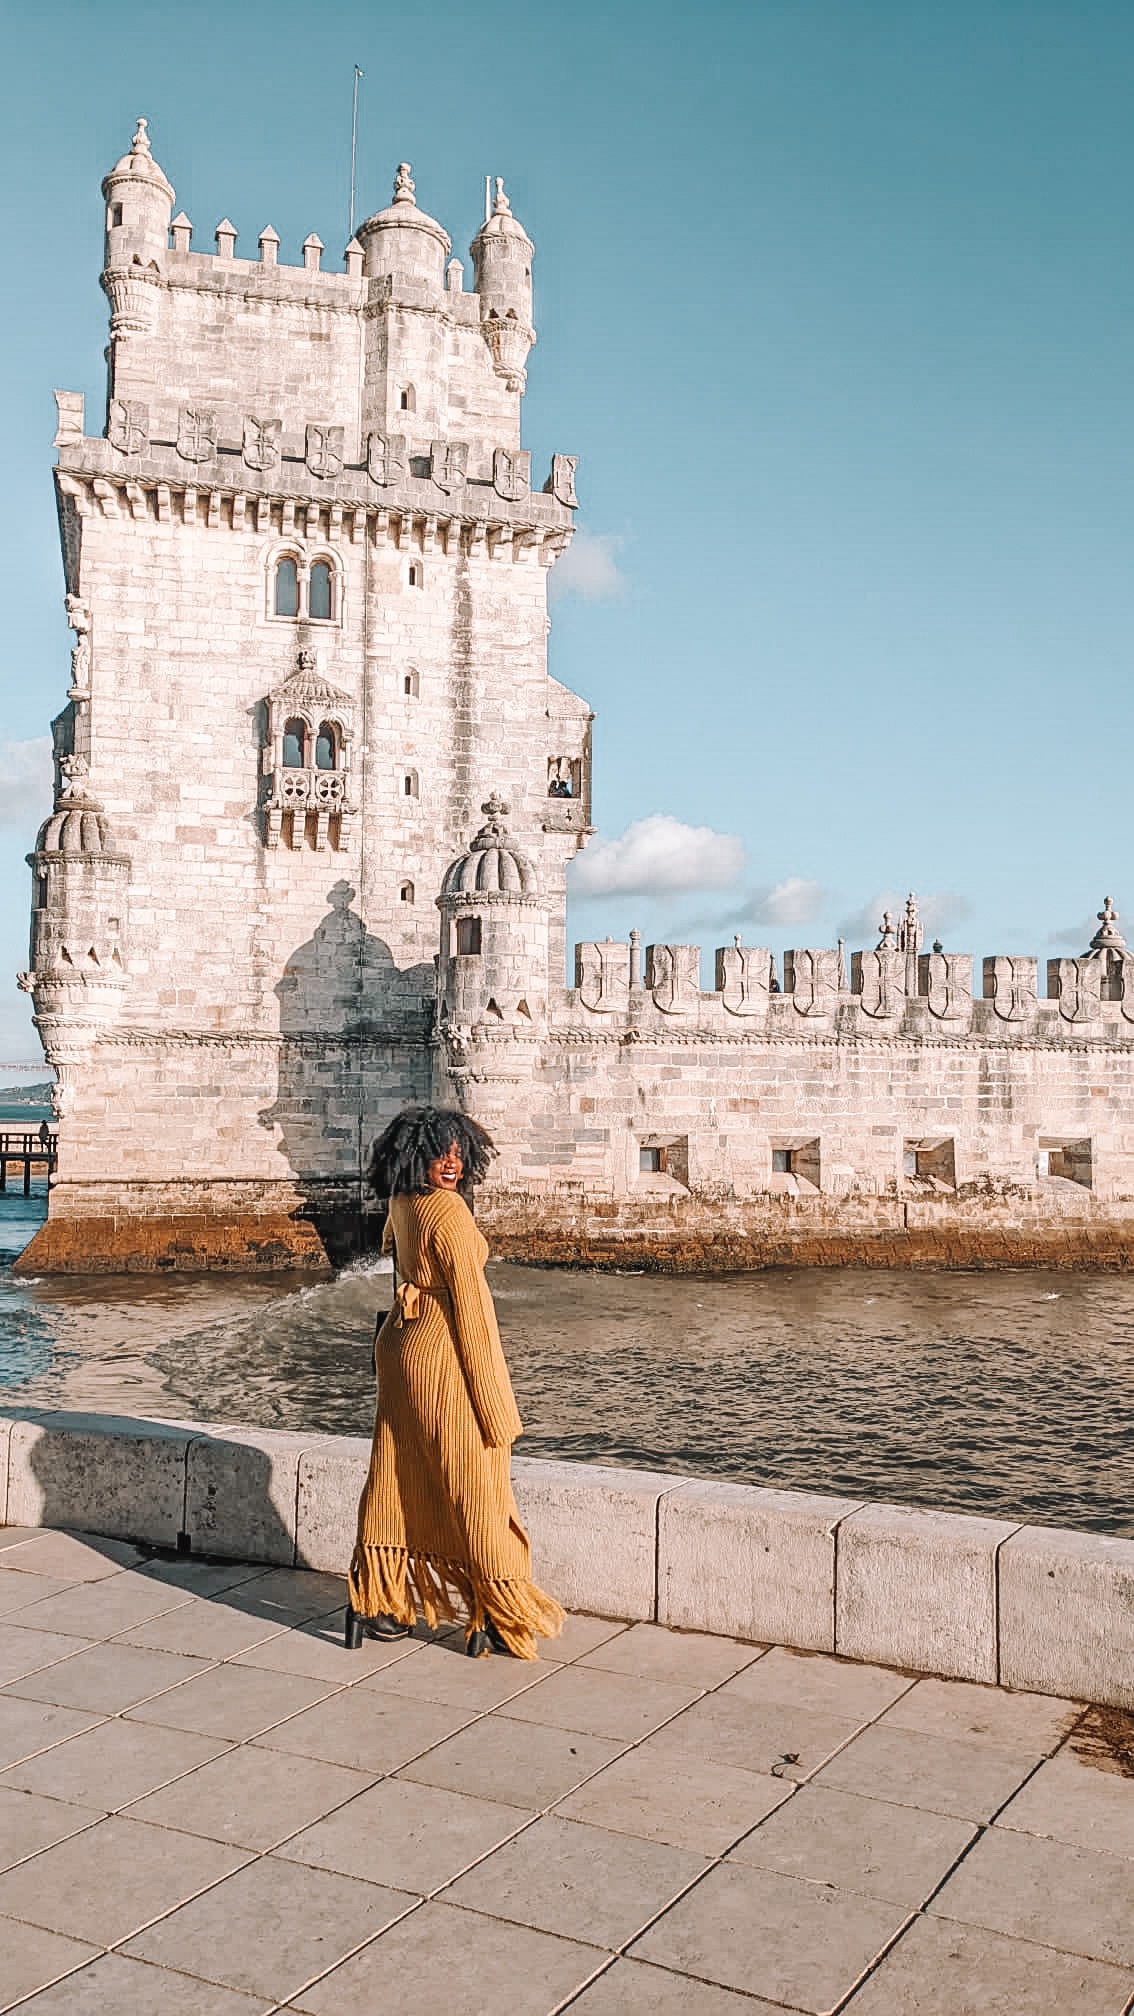 Black woman with curly hair standing in front of the Belem Tower